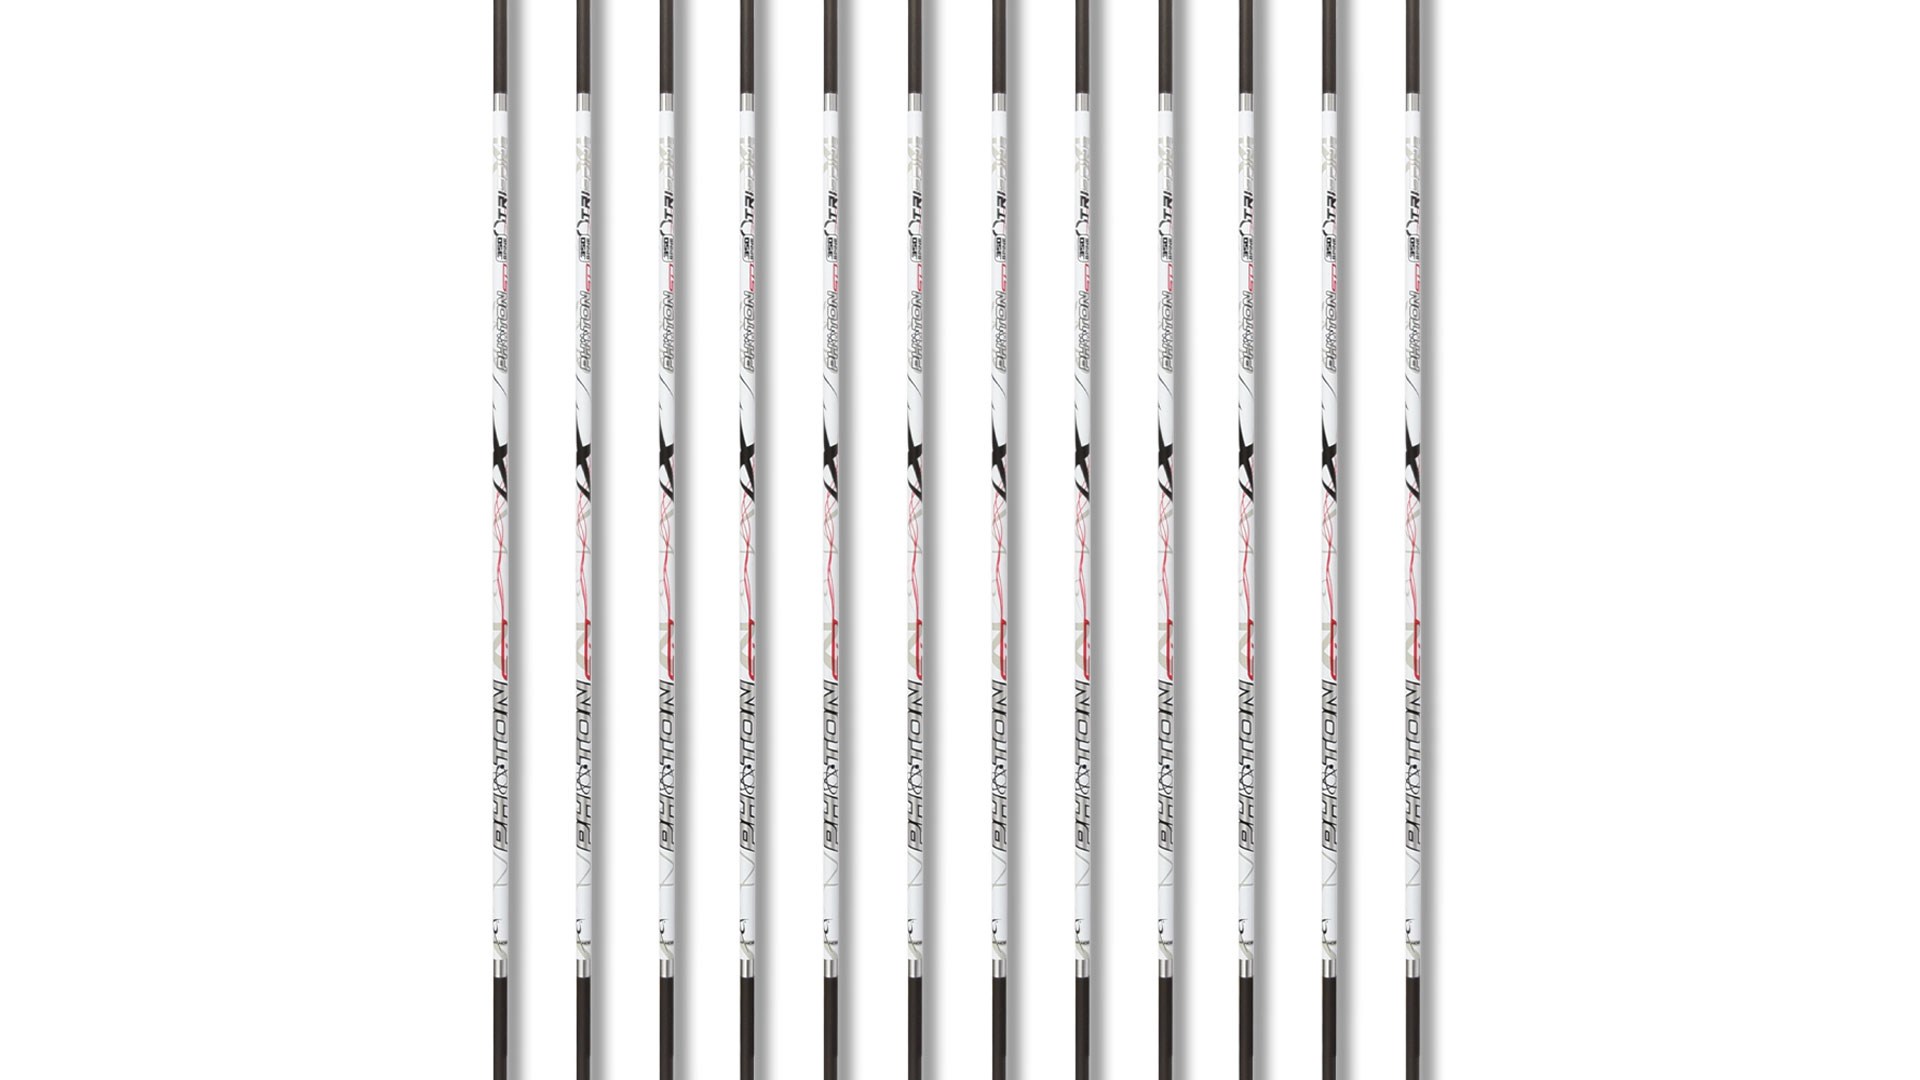 12 pack of Photon shafts